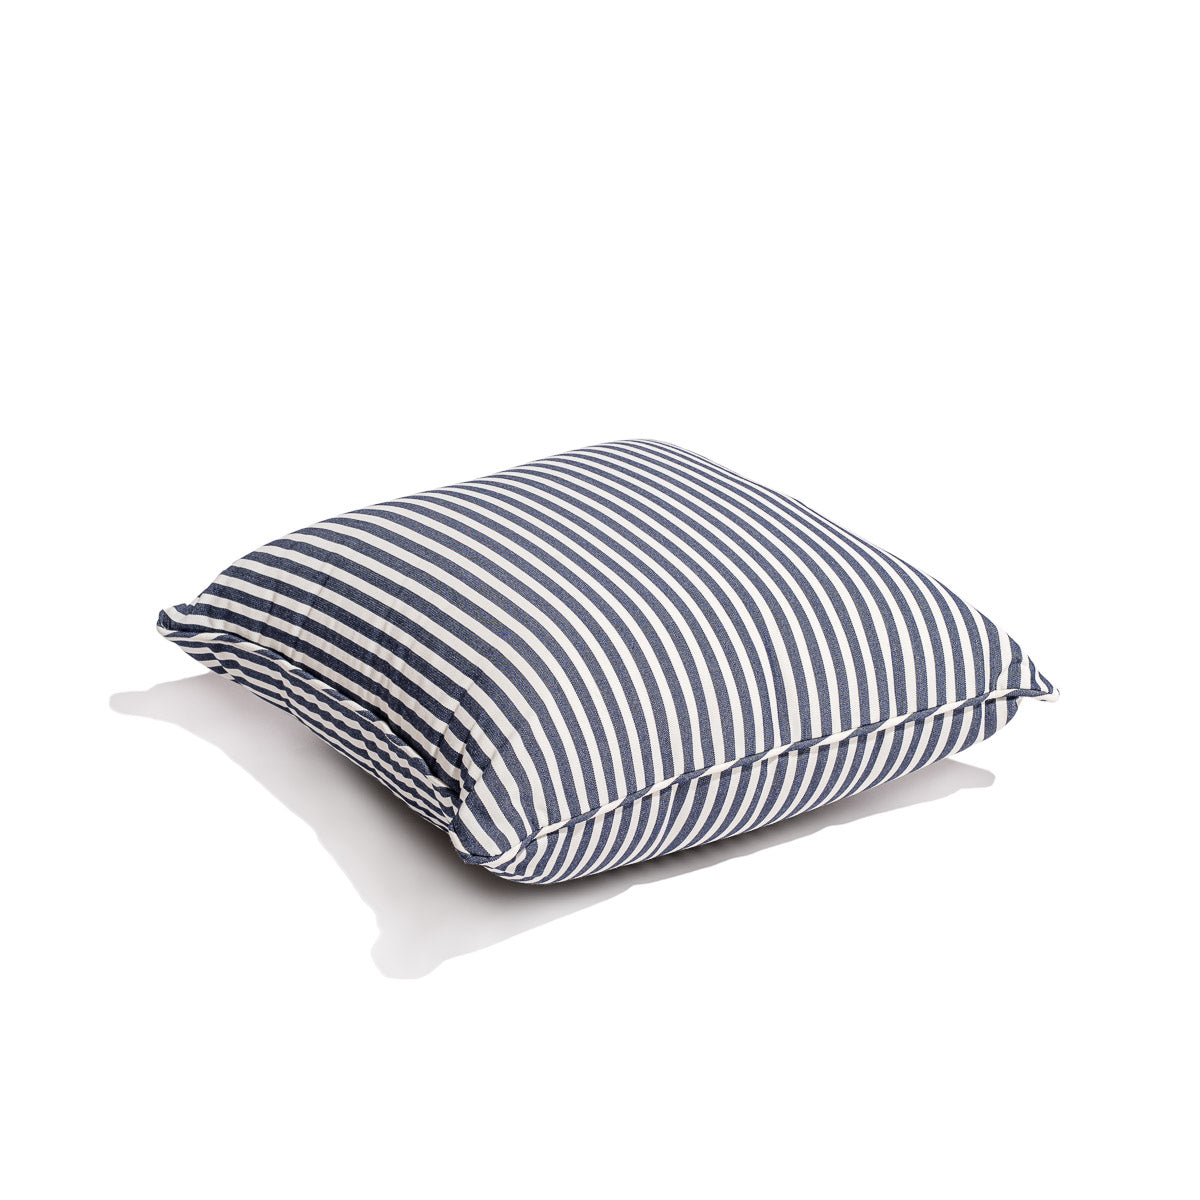 The Small Square Throw Pillow - Lauren's Navy Stripe